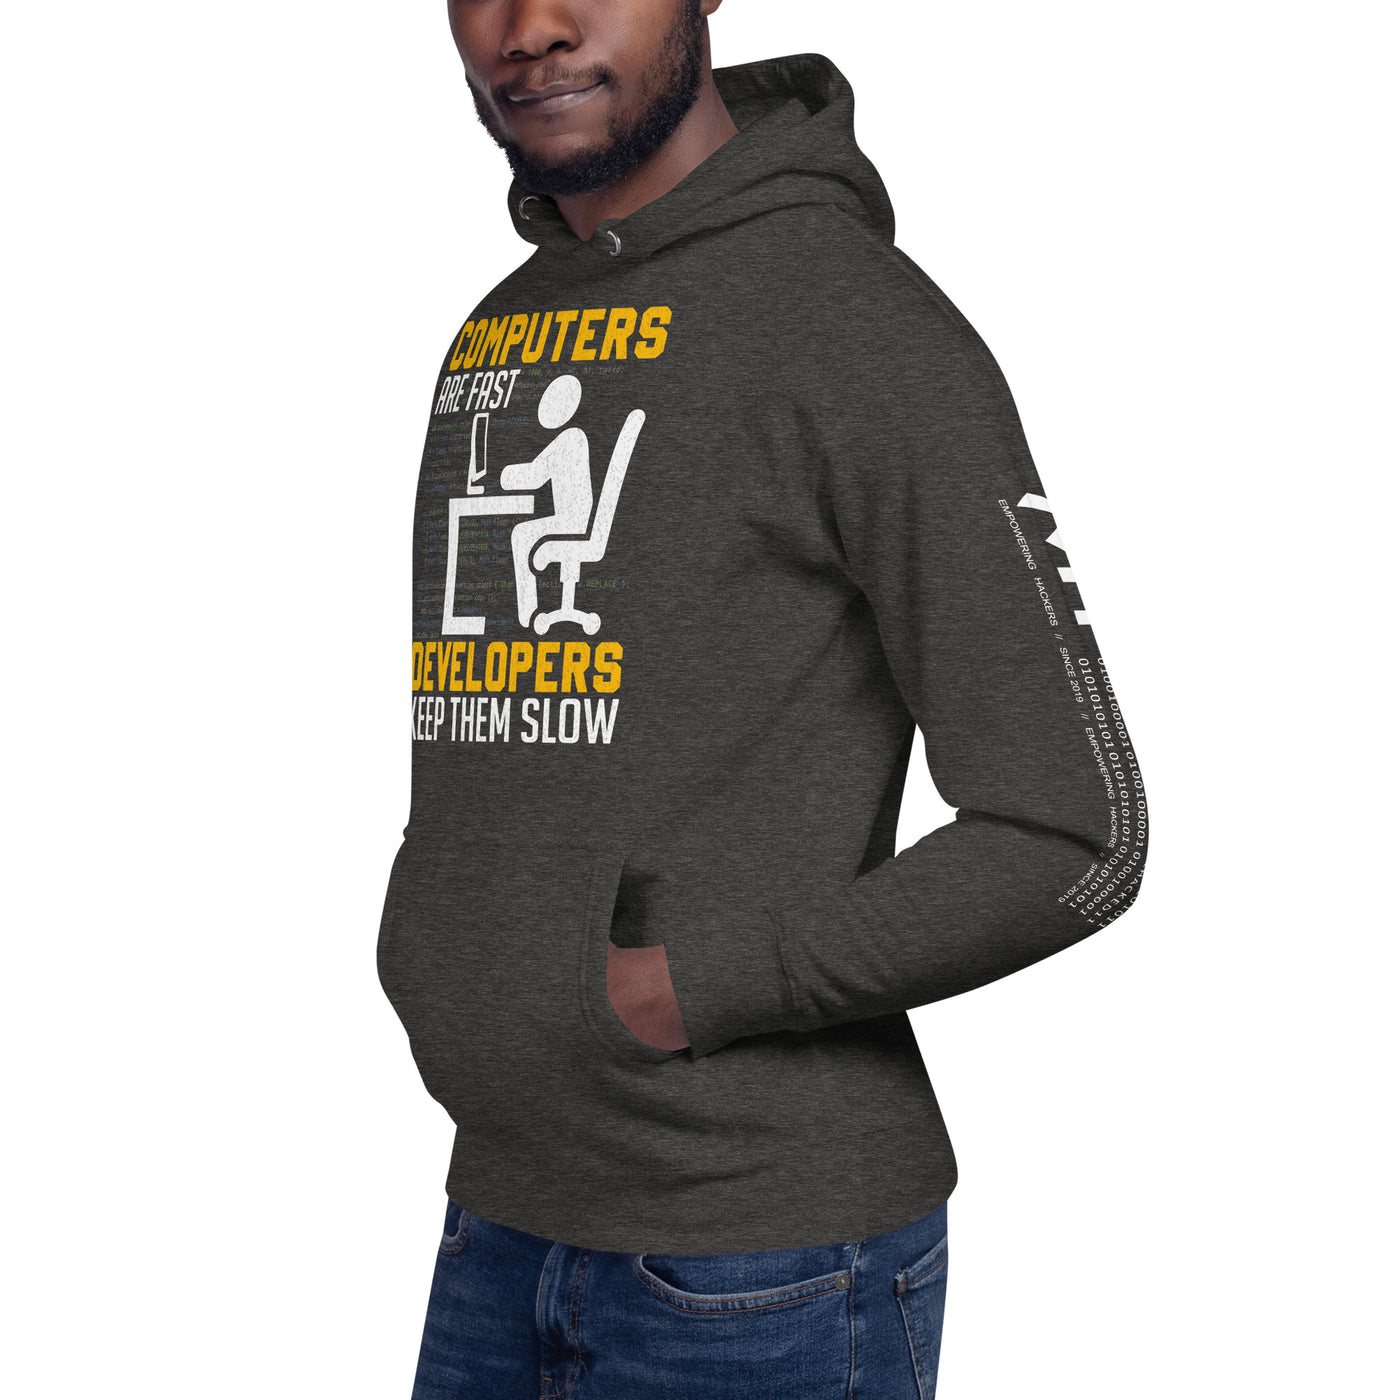 Computers are Fast, Developers make them slow Unisex Hoodie